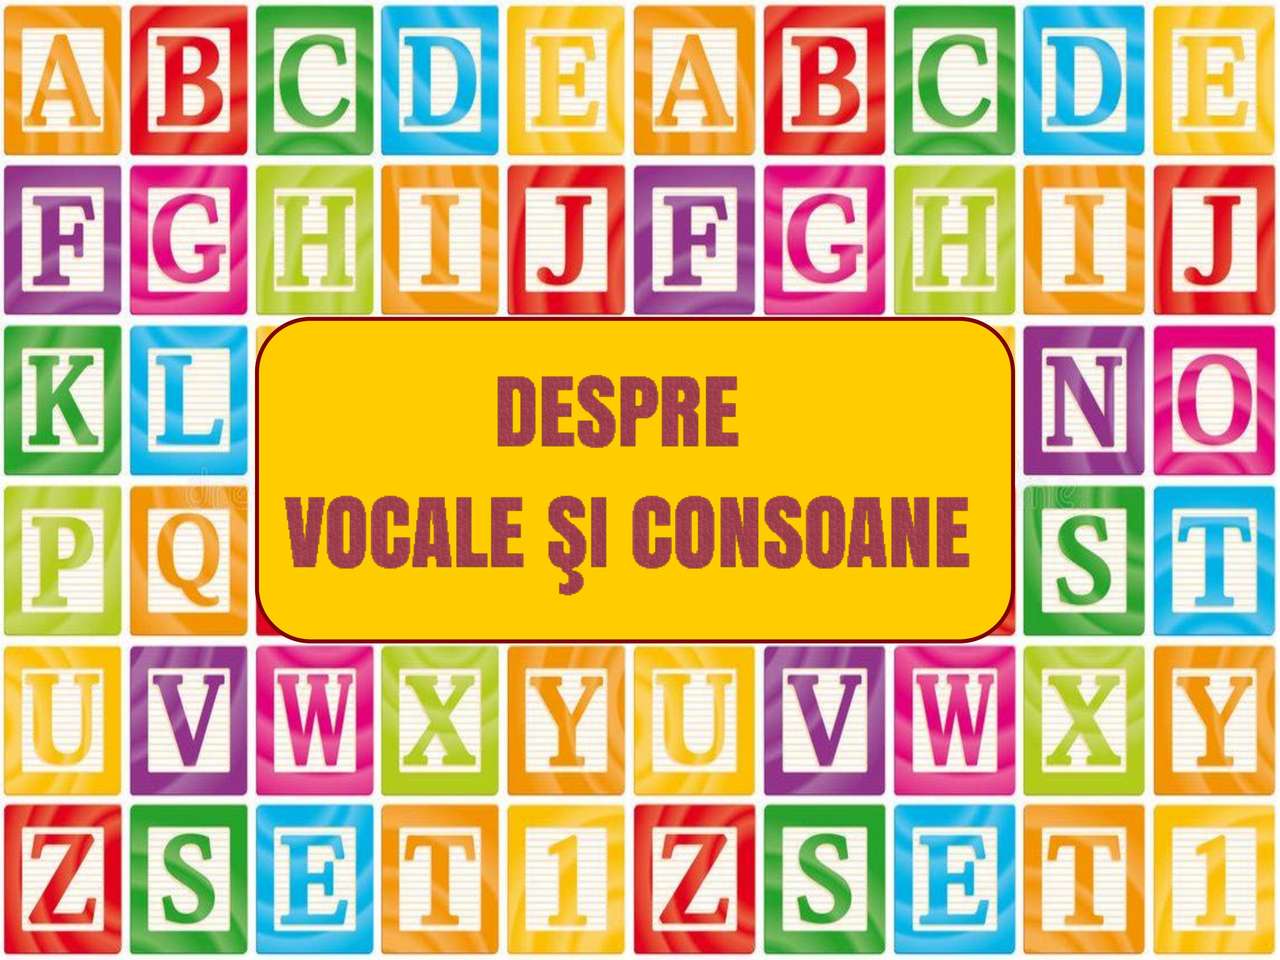 consonants and vowels jigsaw puzzle online